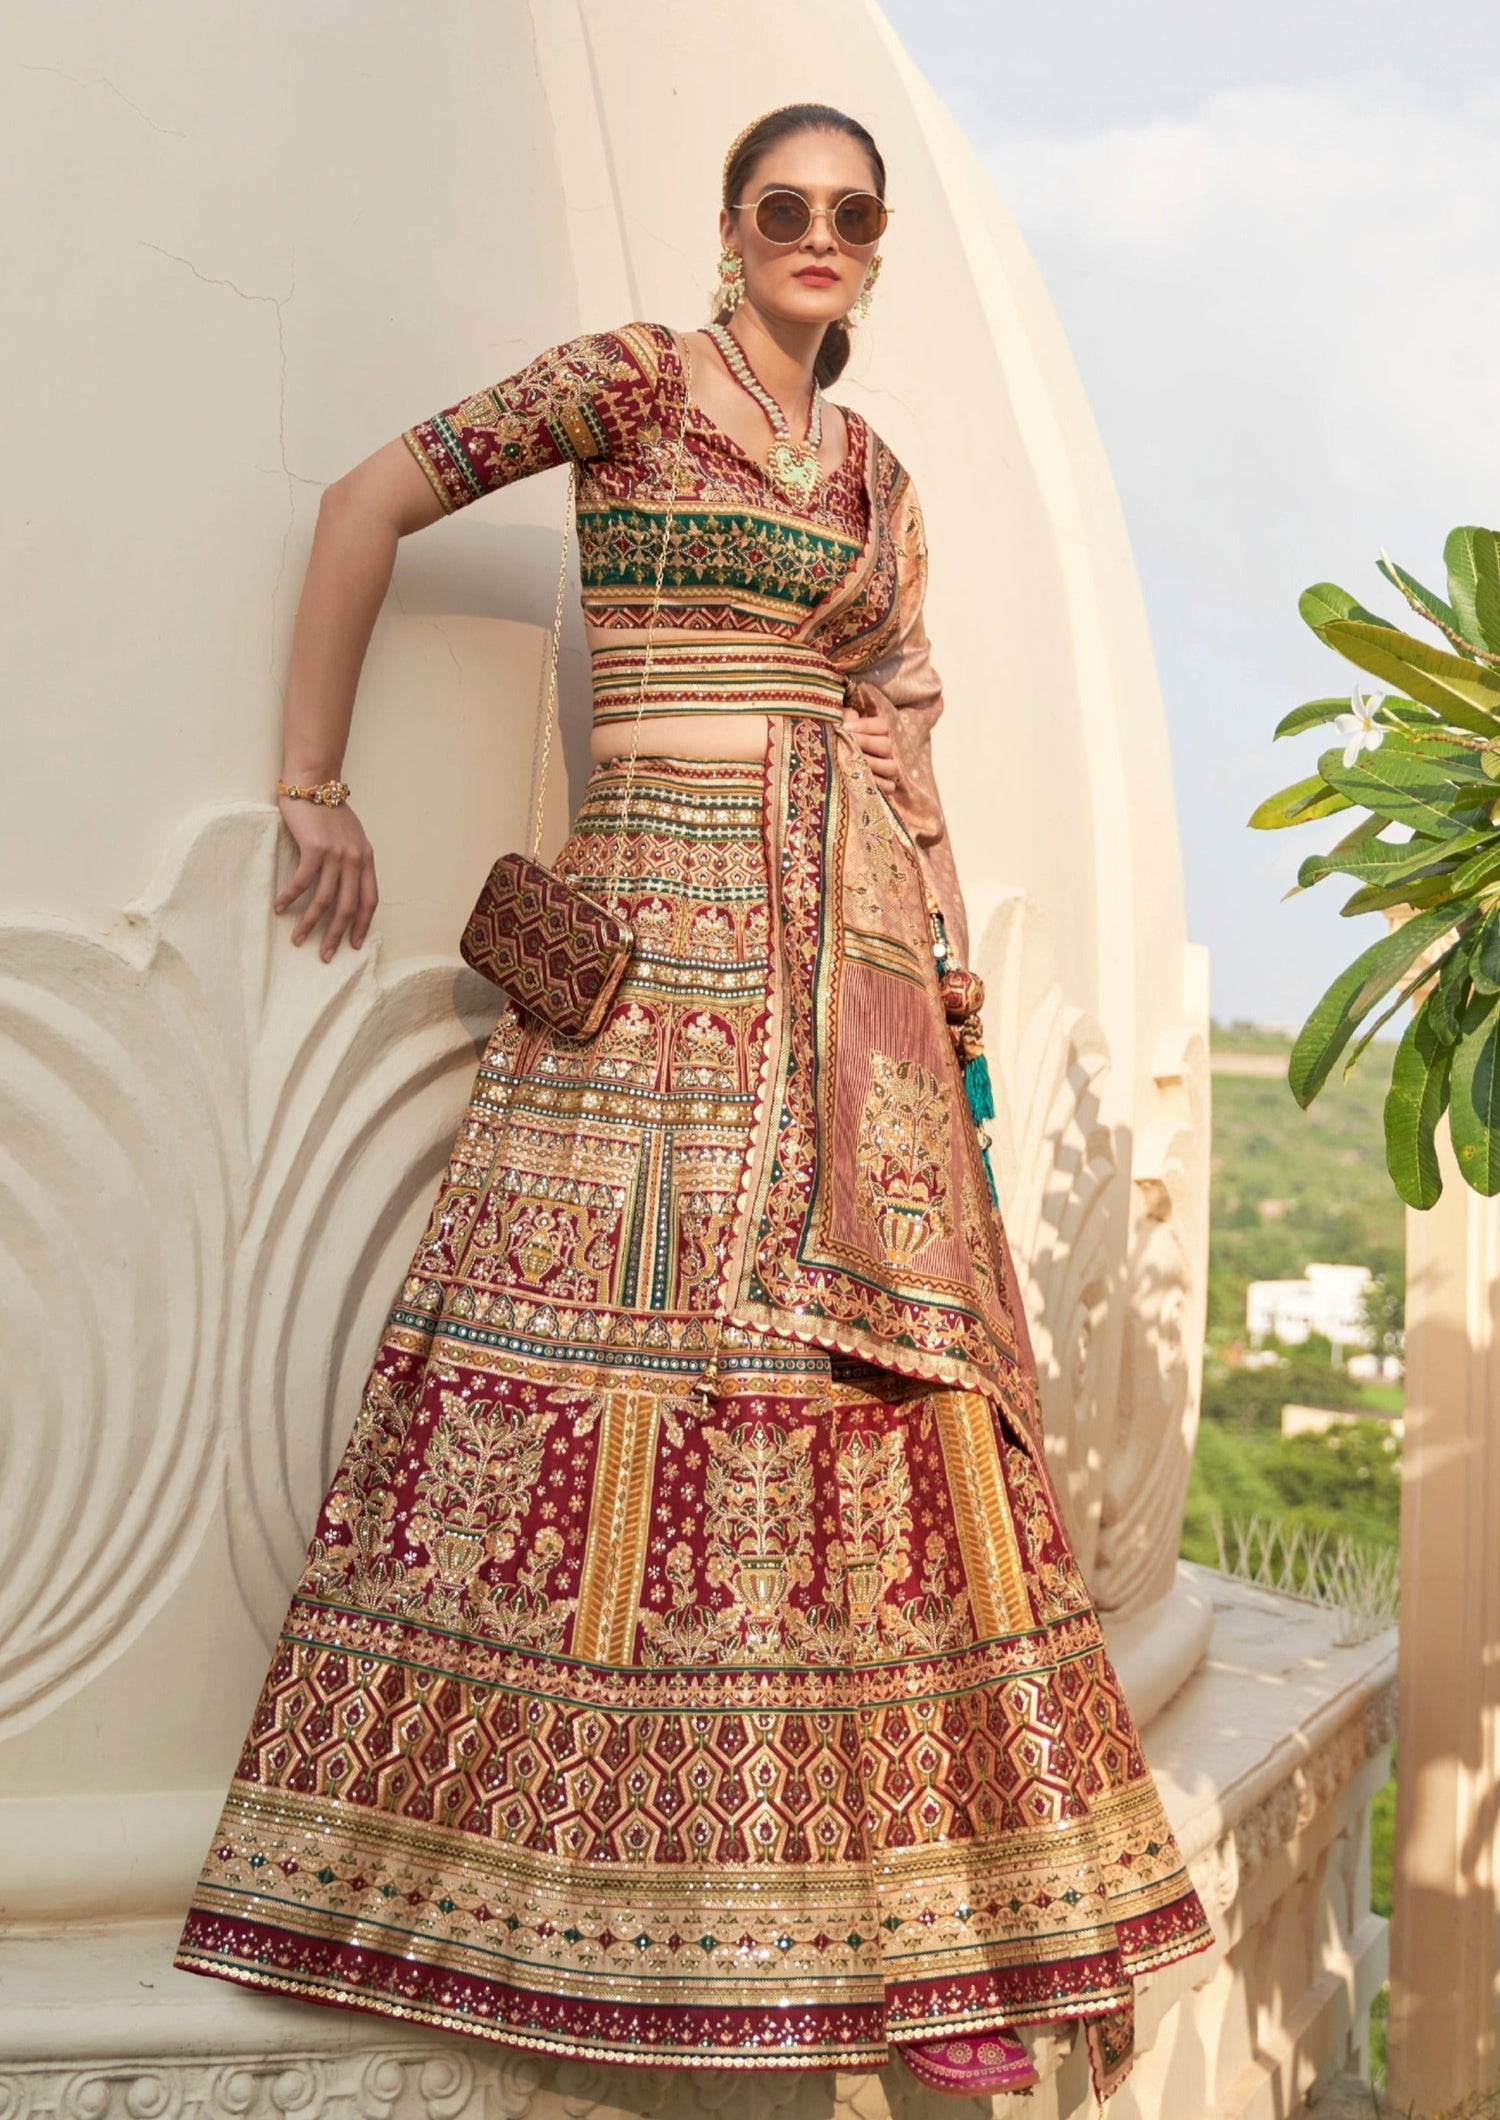 woman in bride in red and green lehenga choli with dupatta